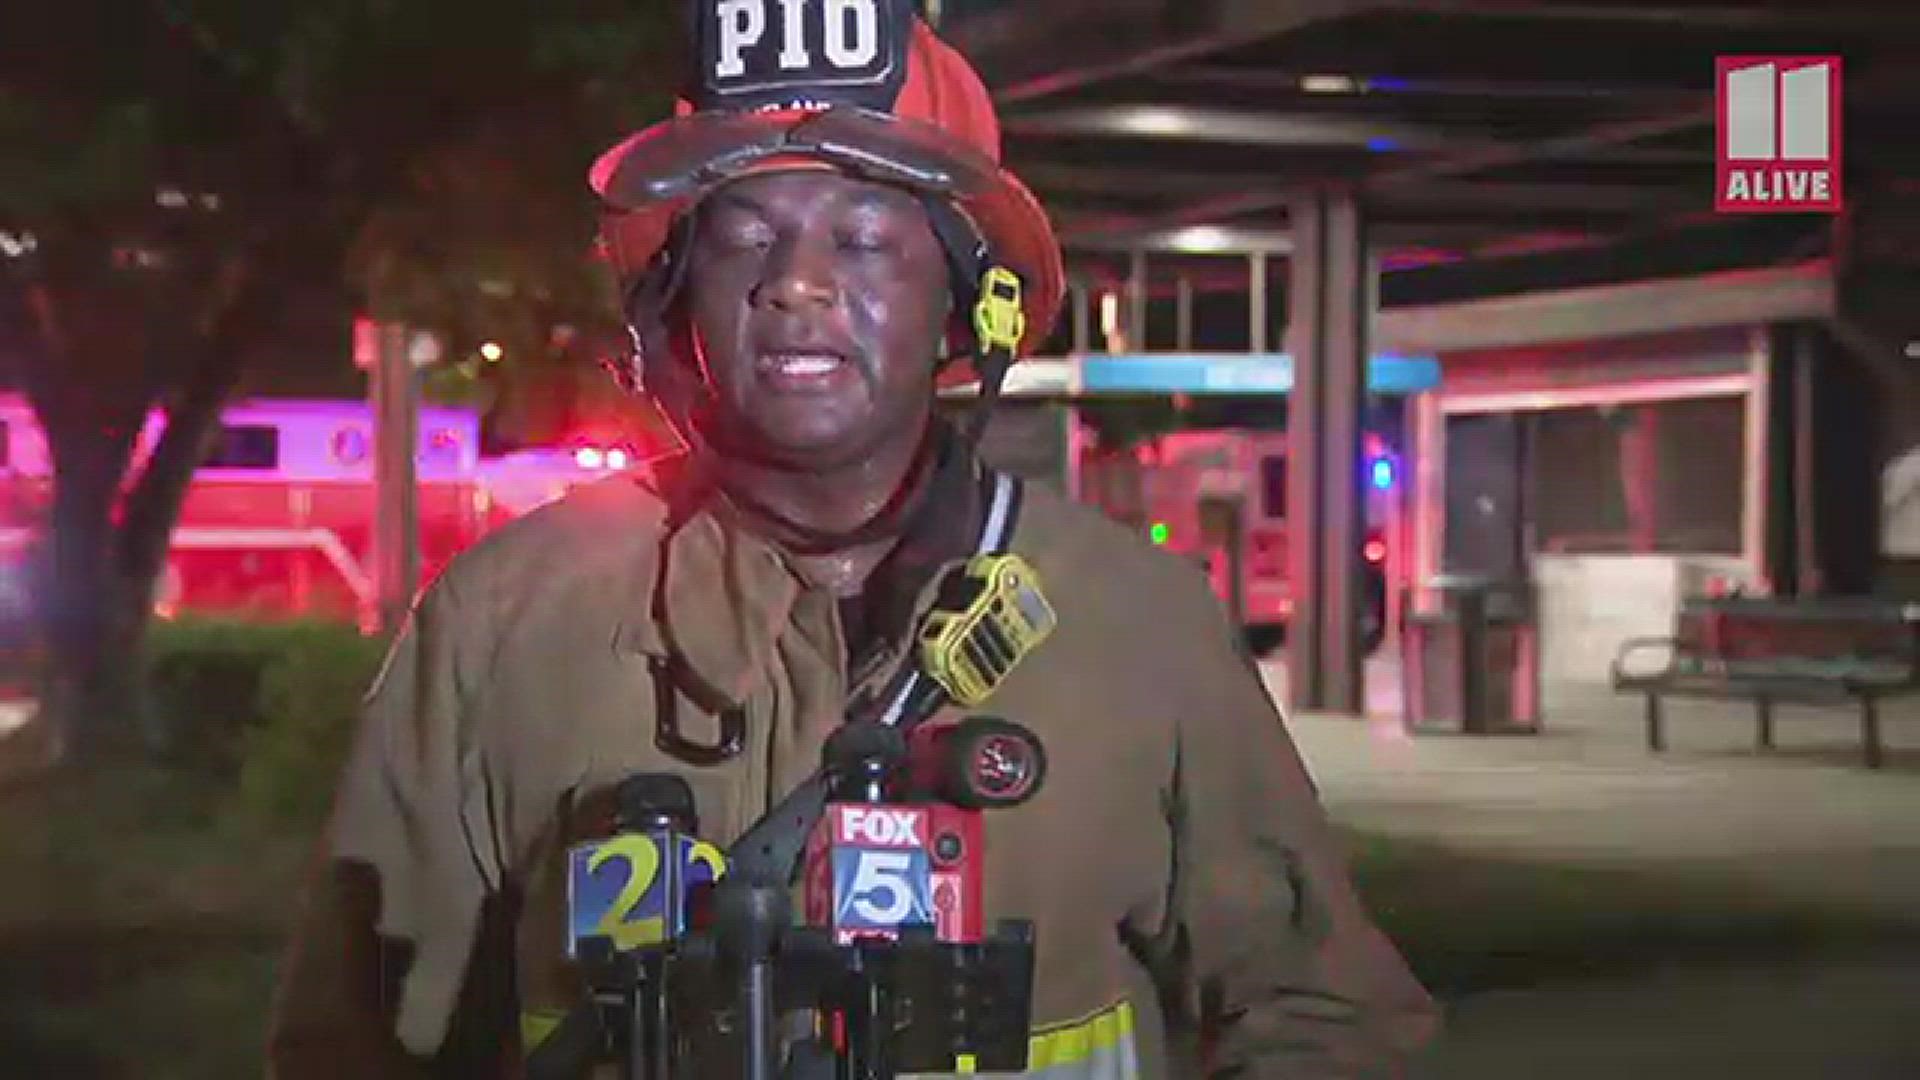 Atlanta Fire gave an update on the situation.